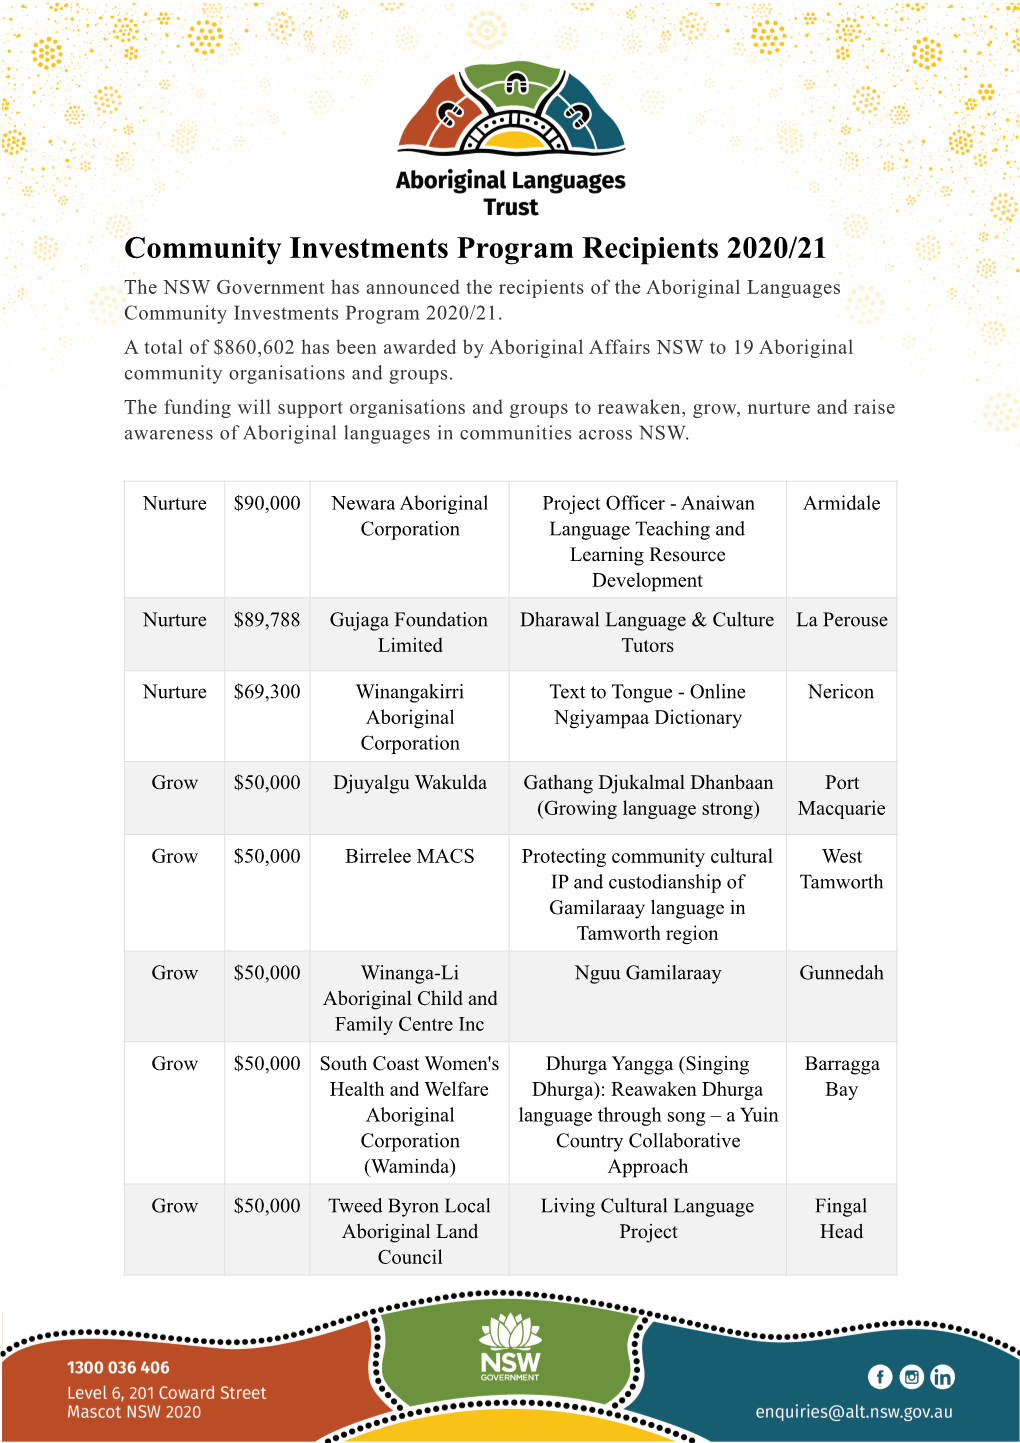 Community Investments Program Recipients 2020/21 the NSW Government Has Announced the Recipients of the Aboriginal Languages Community Investments Program 2020/21